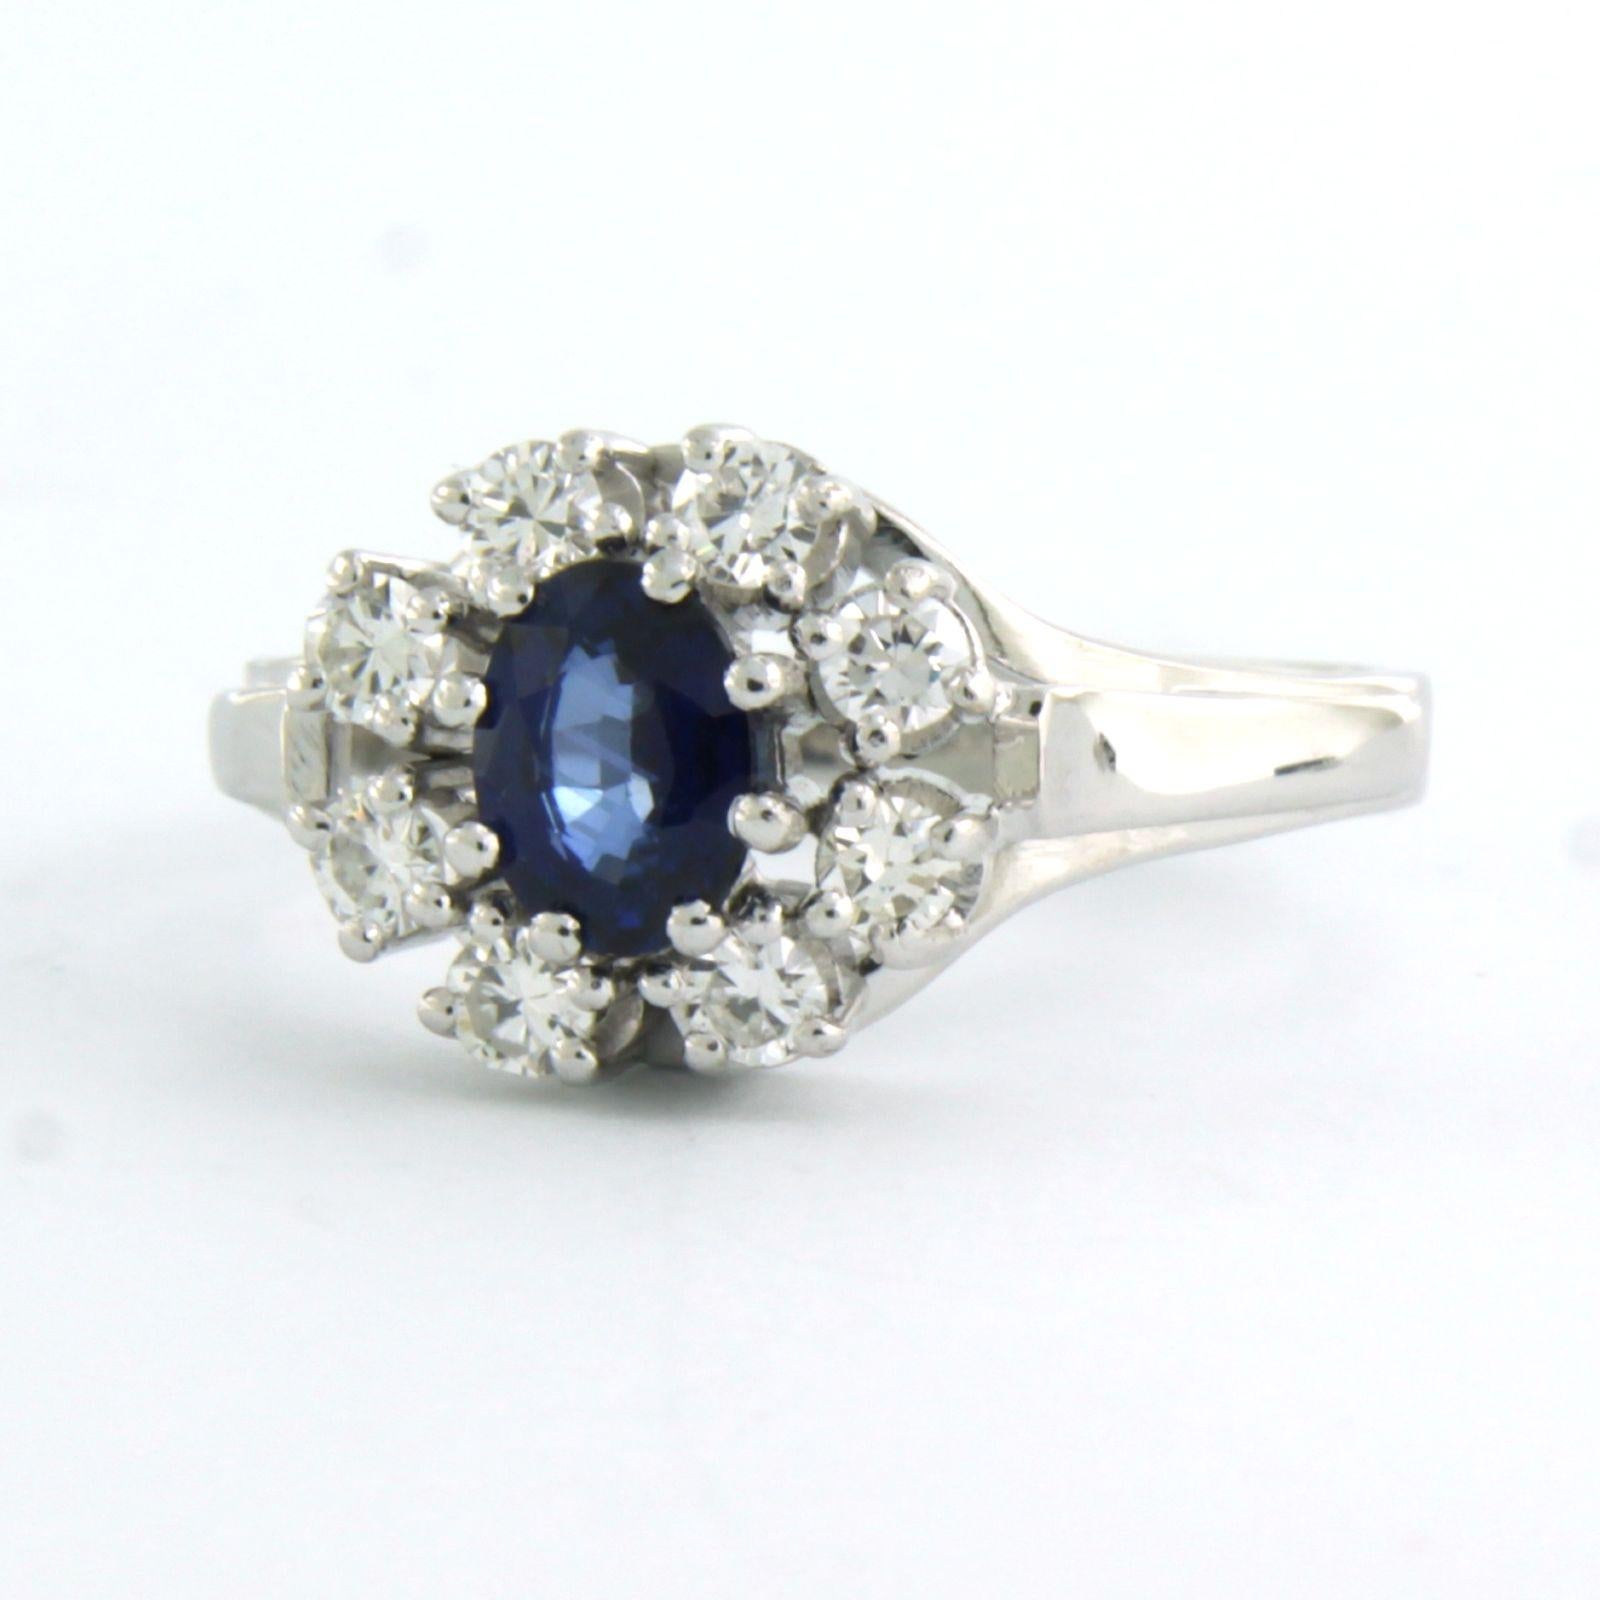 Brilliant Cut Cluster ring set with Sapphire and diamonds 14k white gold